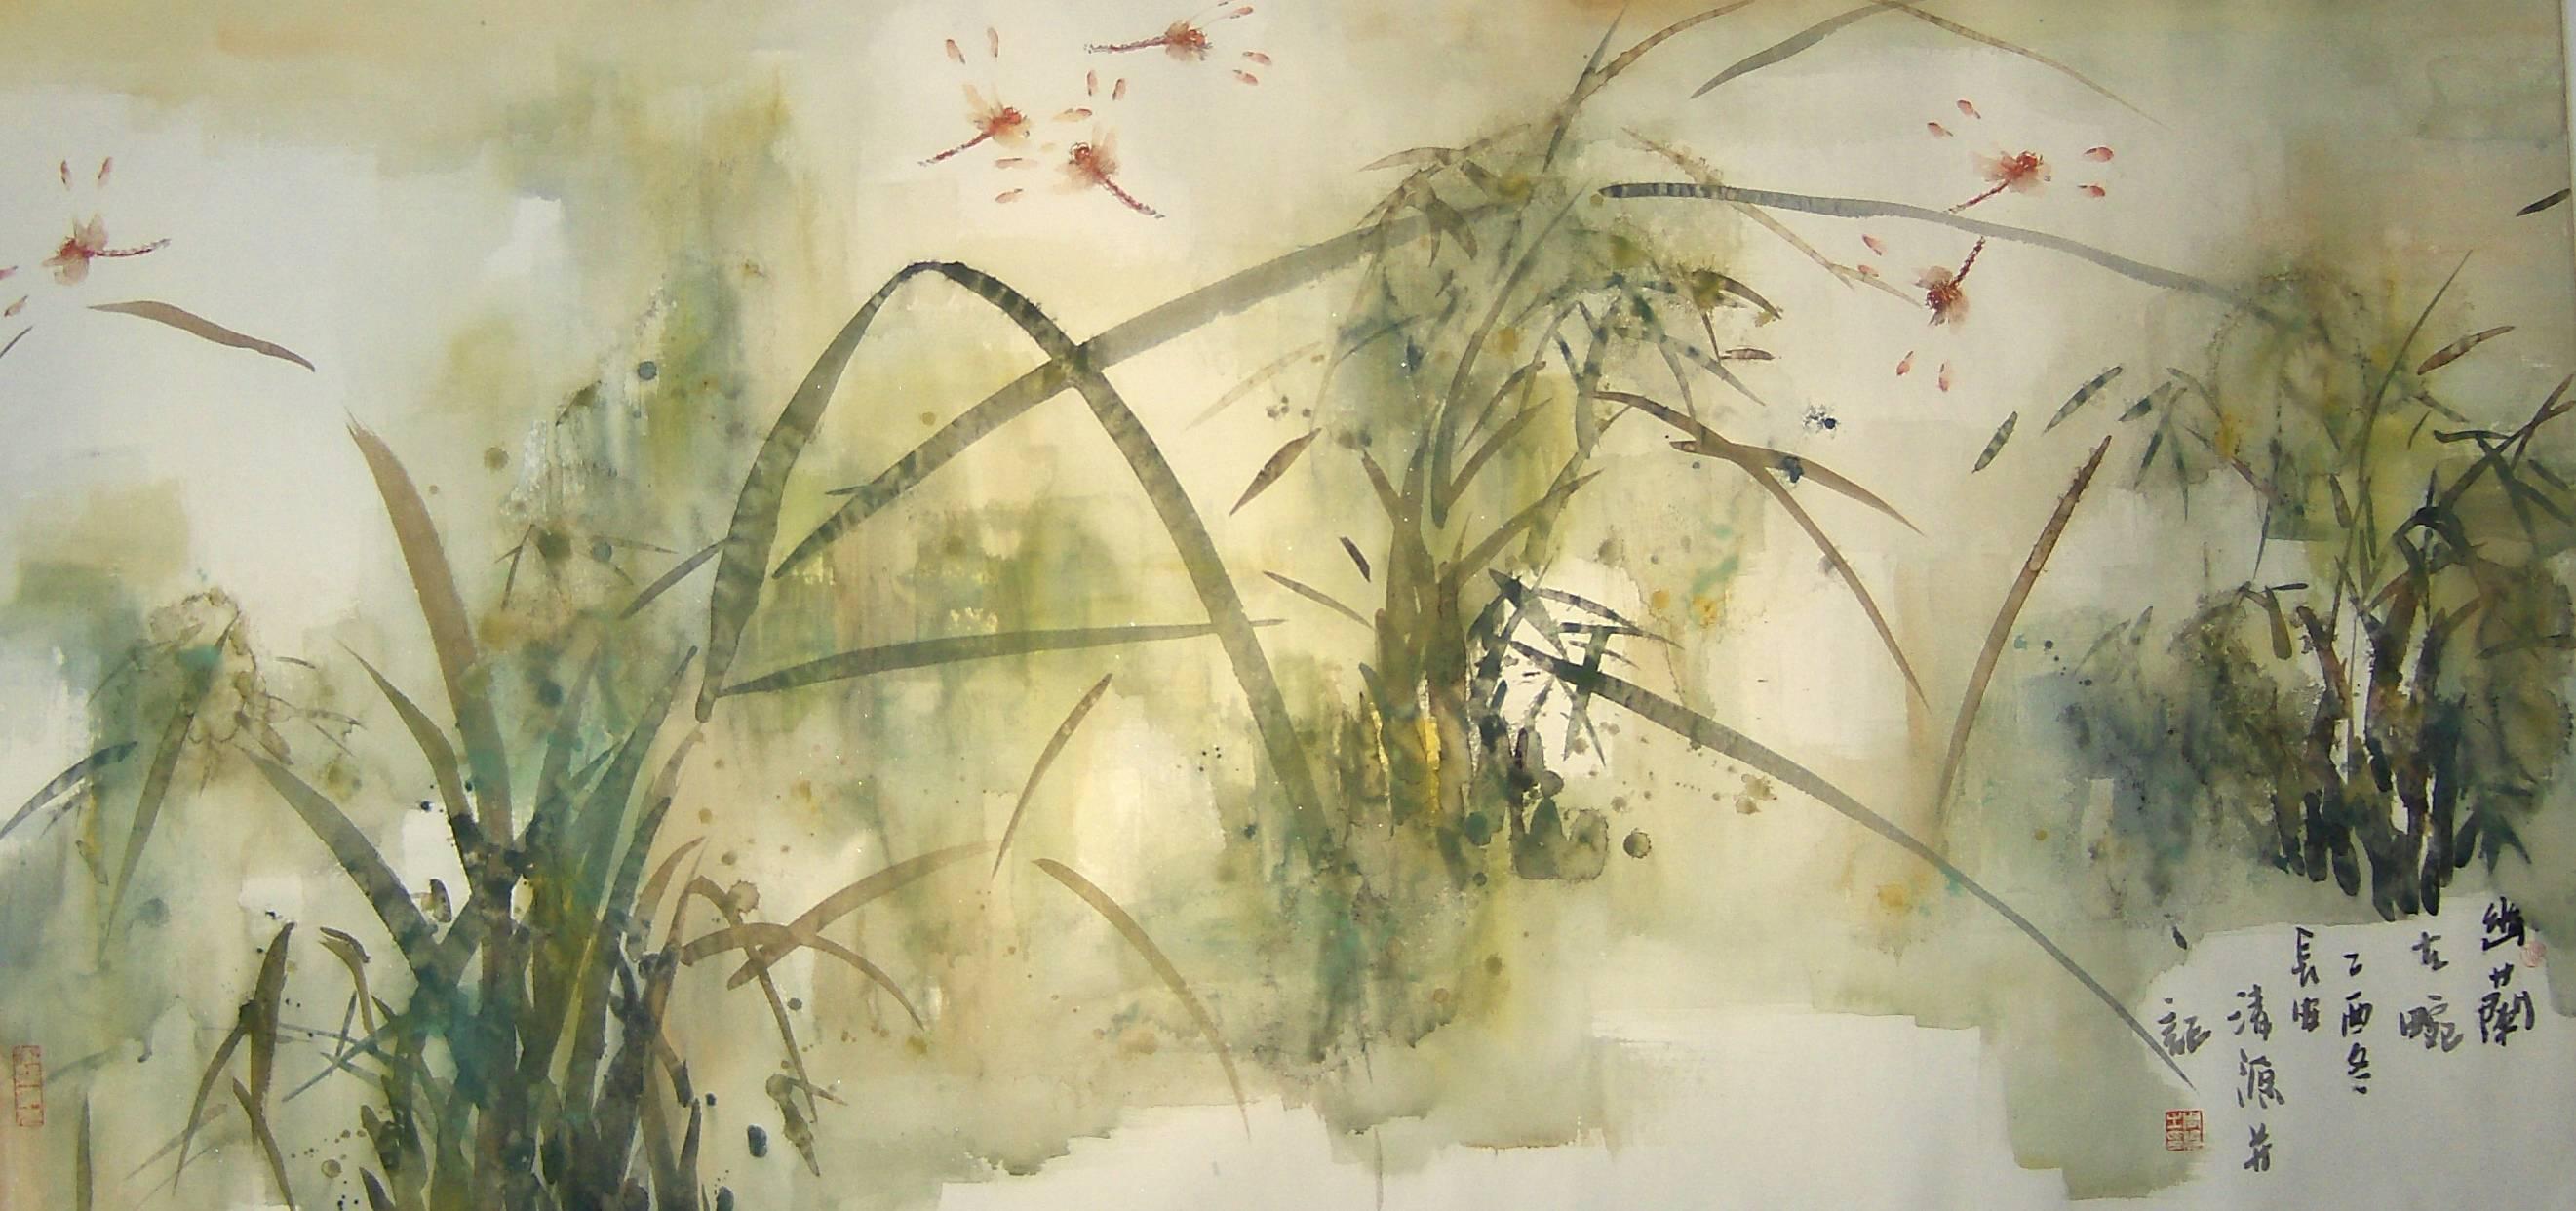 Zhou Xiao Abstract Drawing - Dragonfly Series #19